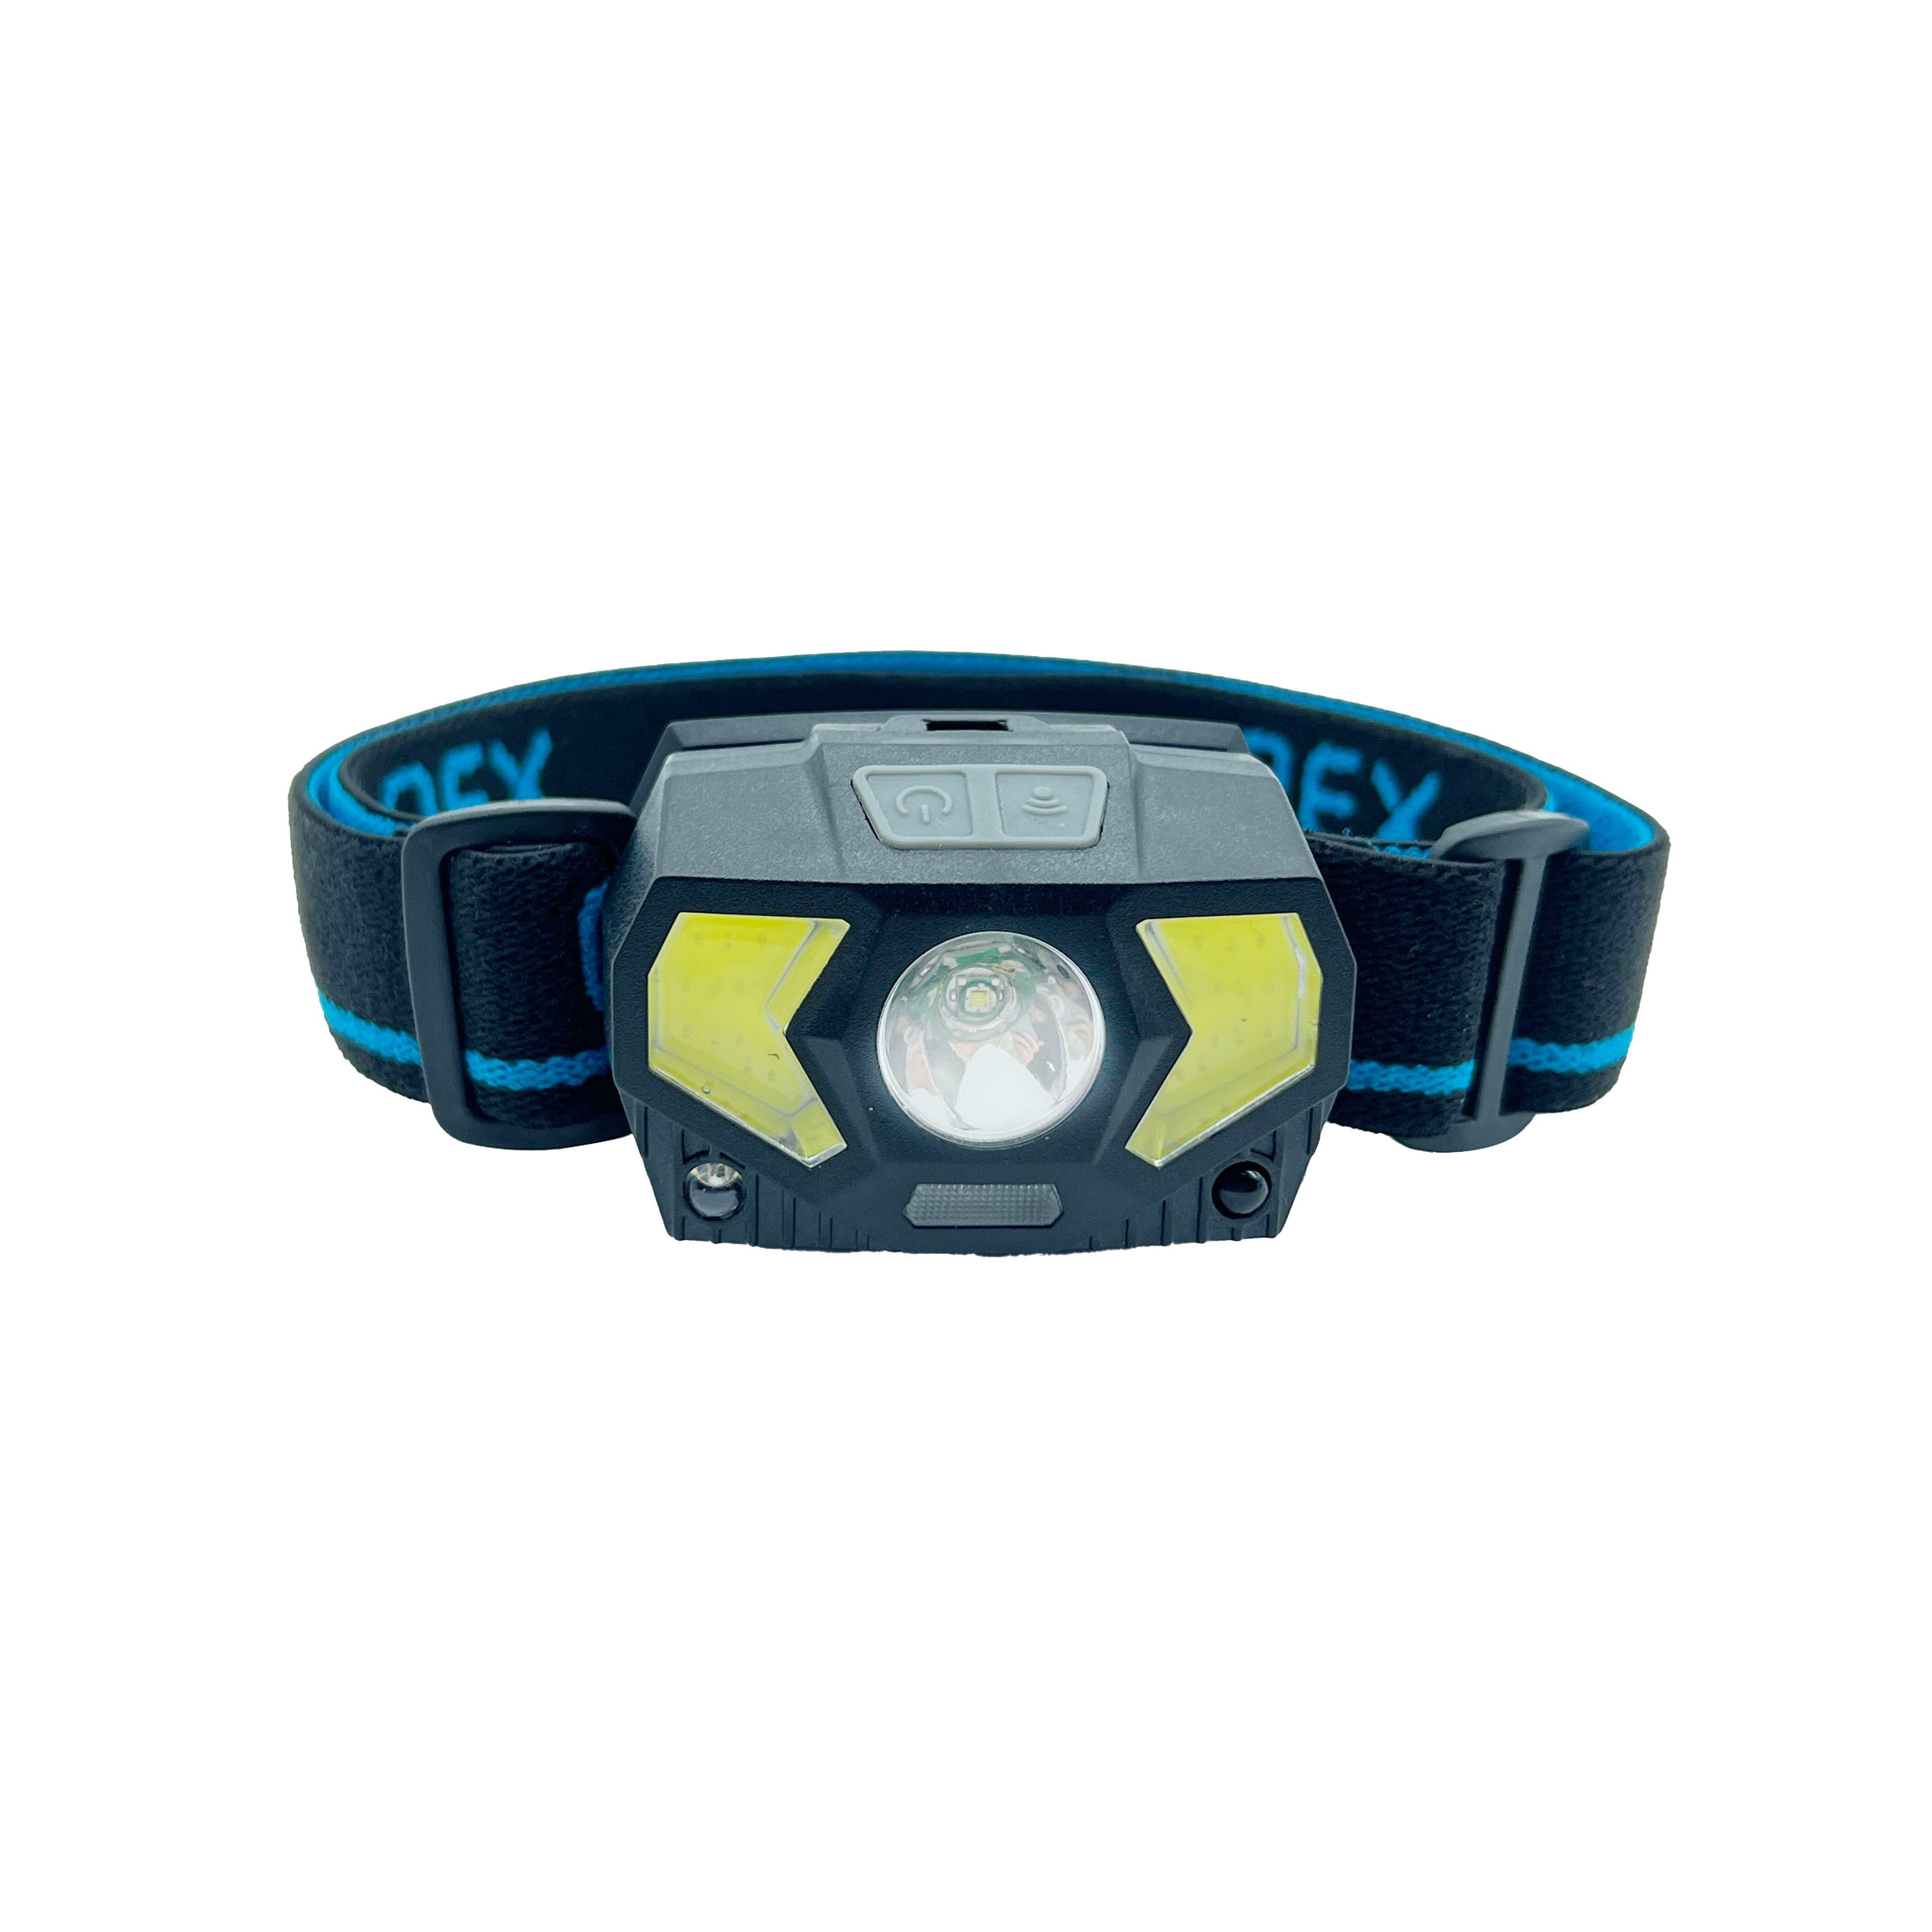 OEX 300L Rechargeable Head Torch Black